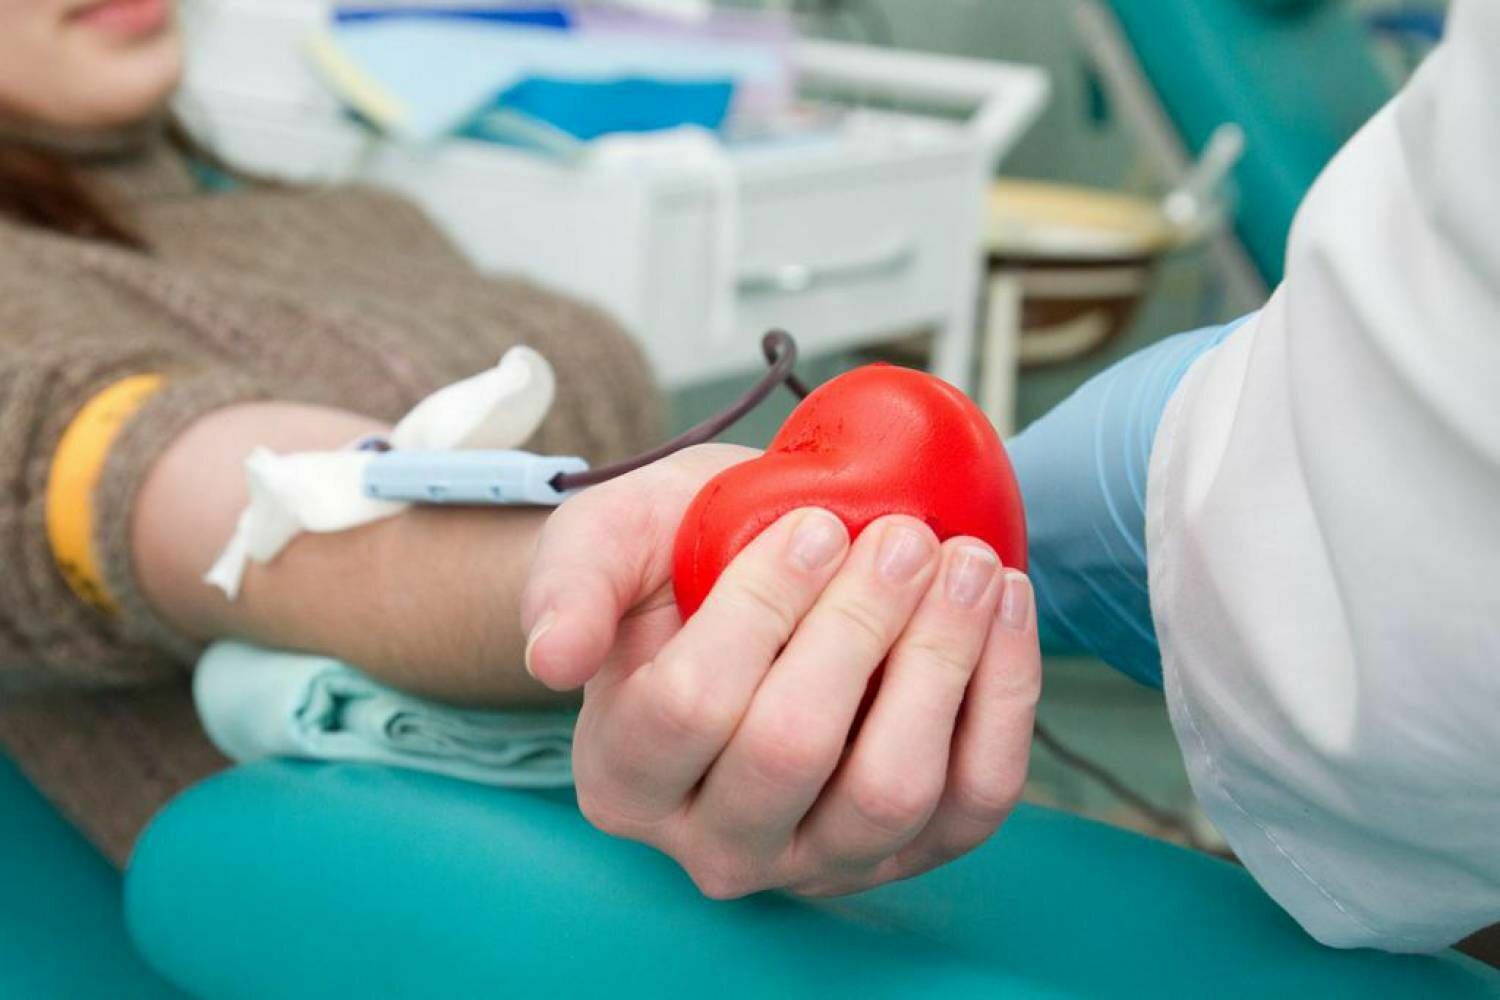 60% of Russians became blood donors